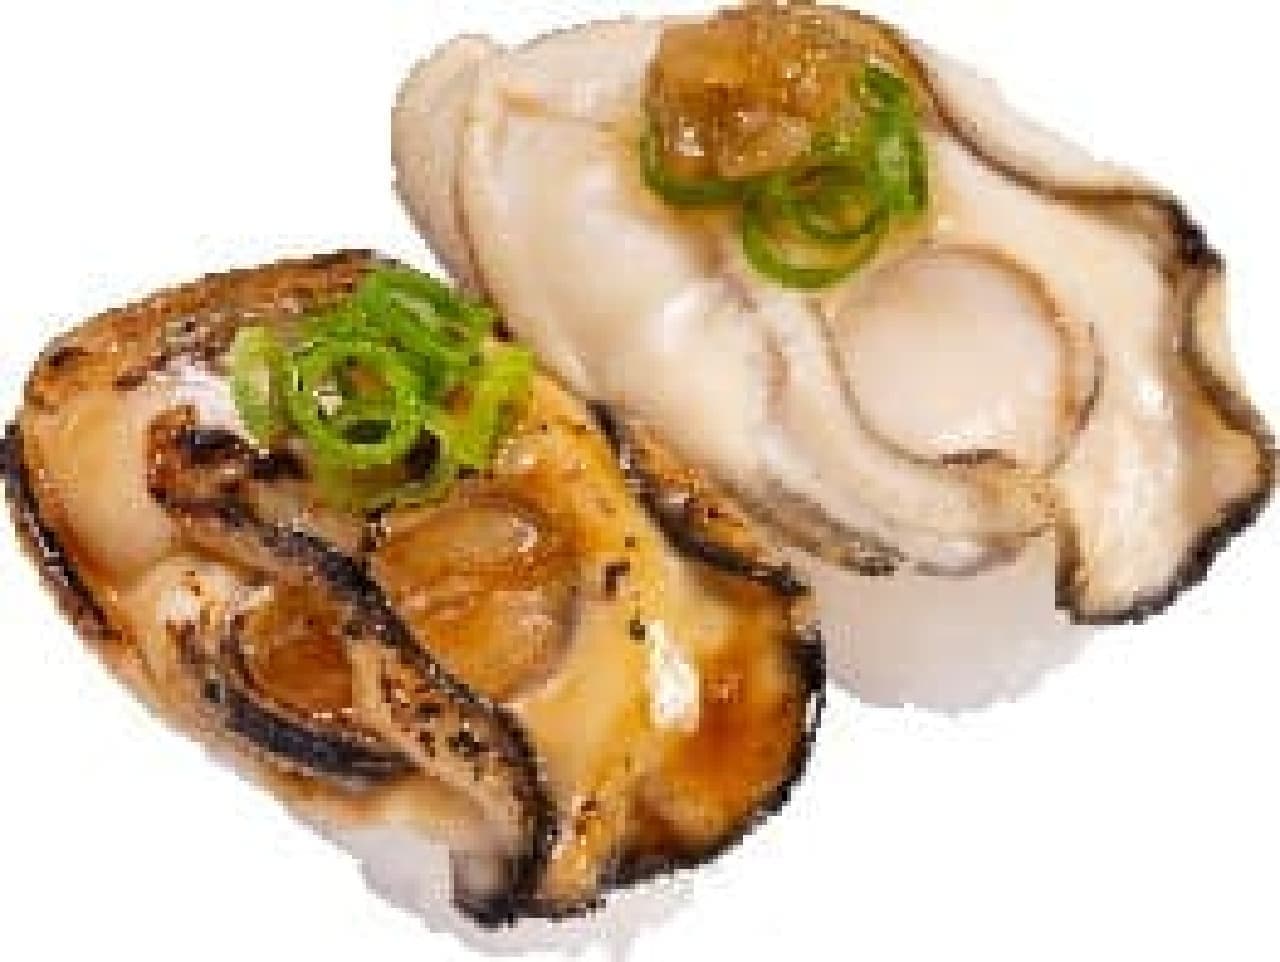 Kappa Sushi "Comparison of Steamed Oysters from Seto Inland Sea".